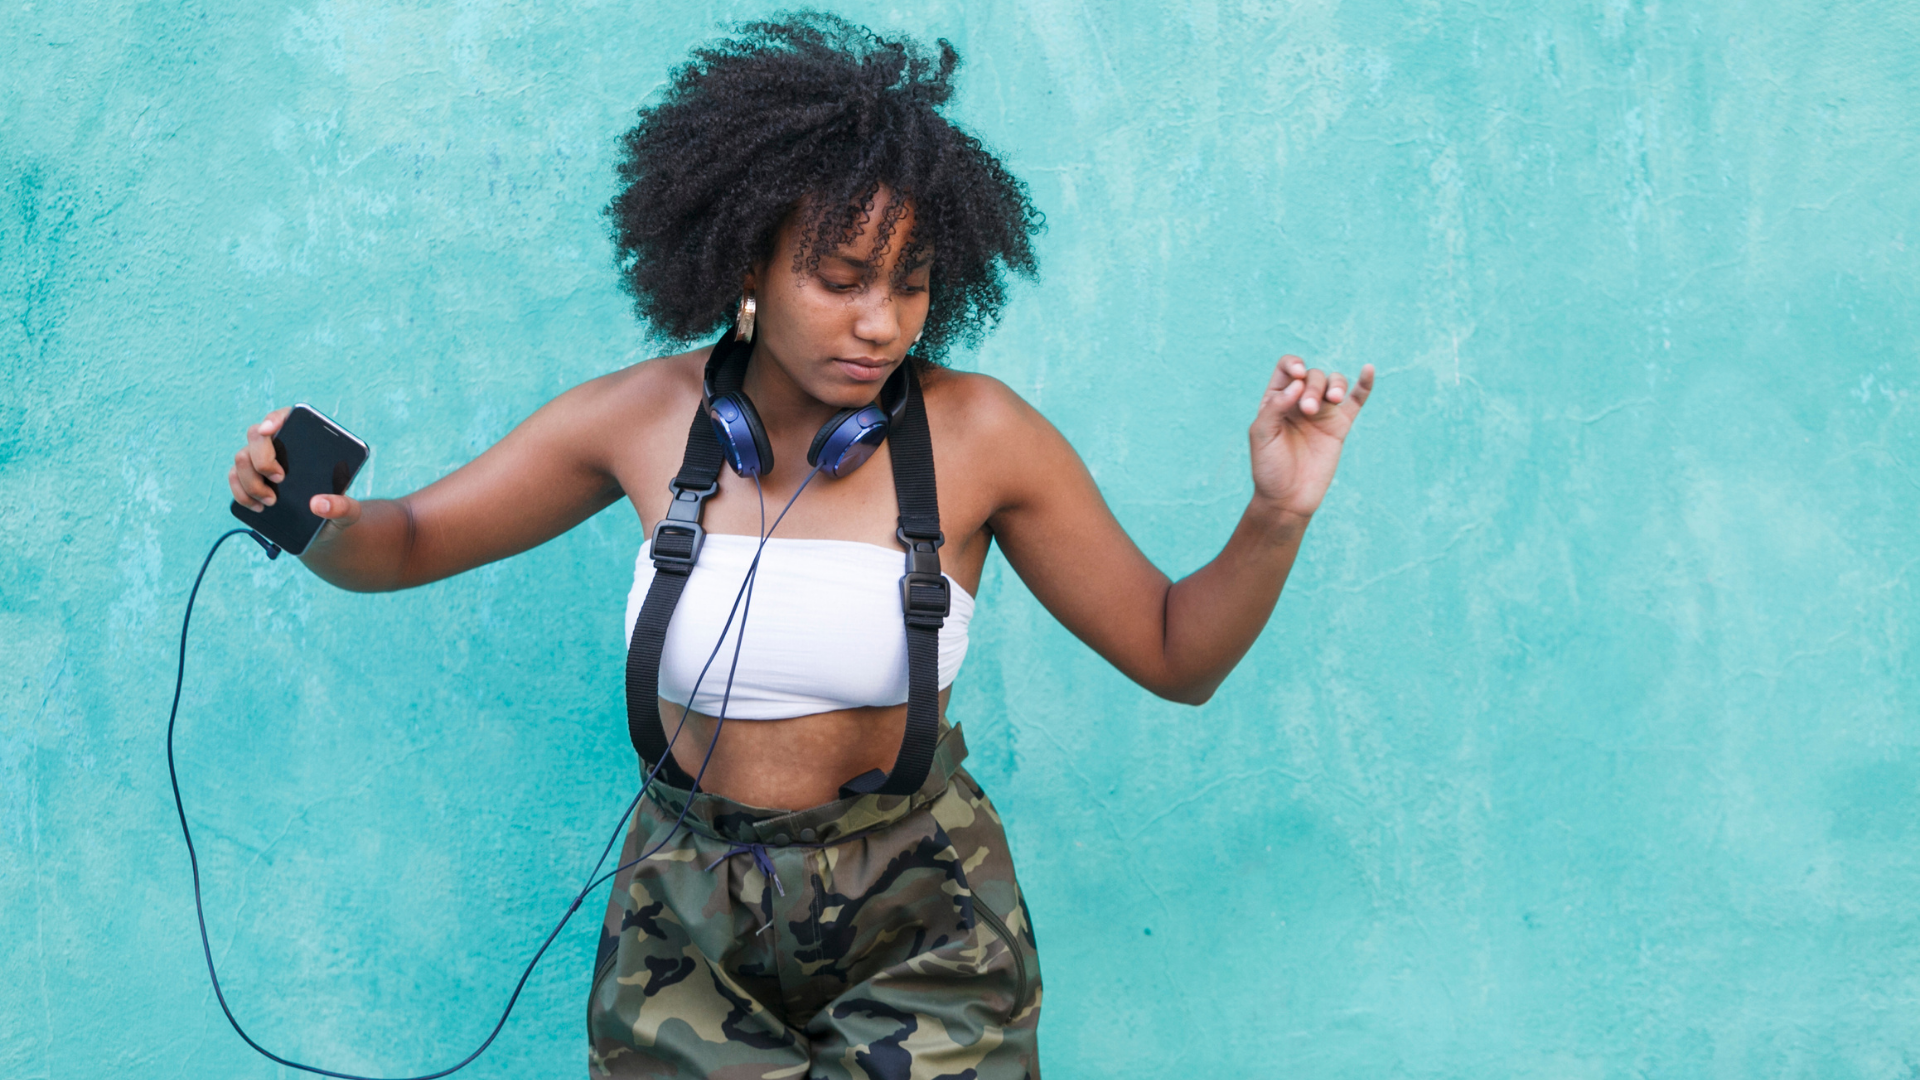 woman wearing camo pants and white crop top and headphones dancing against blue wall